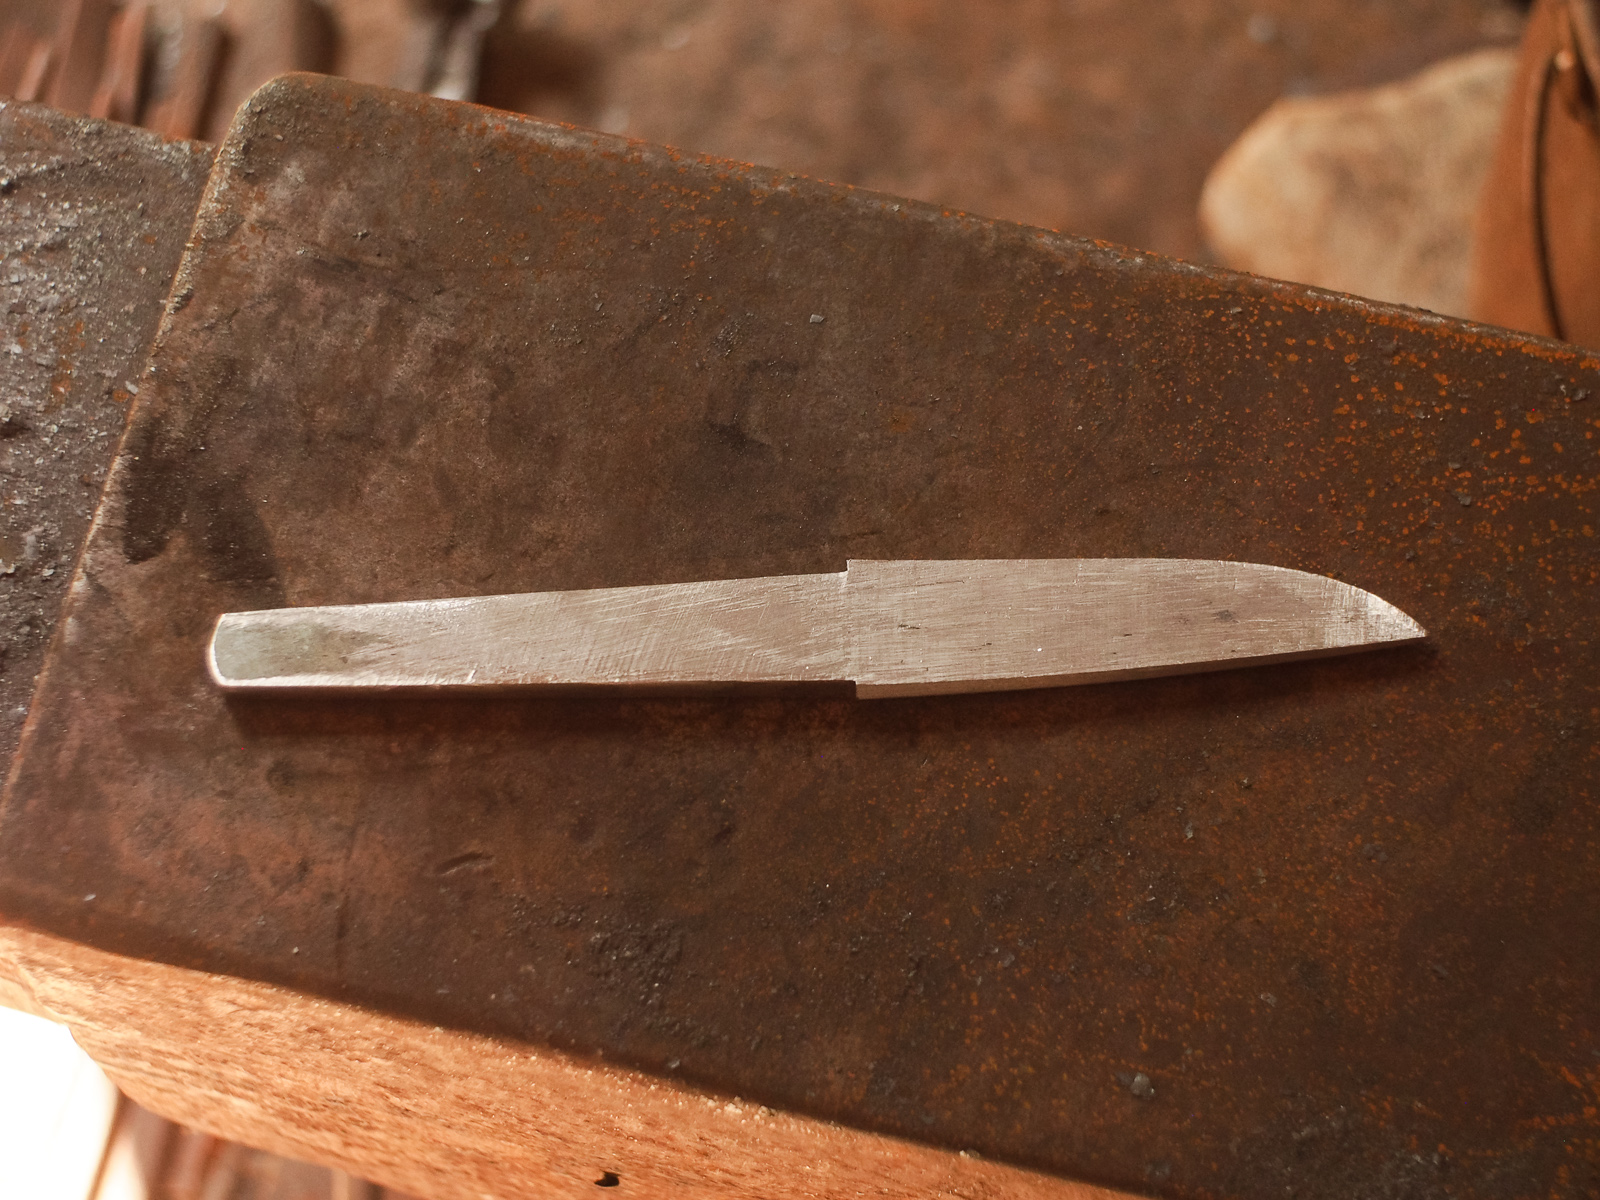 Island Blacksmith: Hand forged knives from reclaimed shear steel.